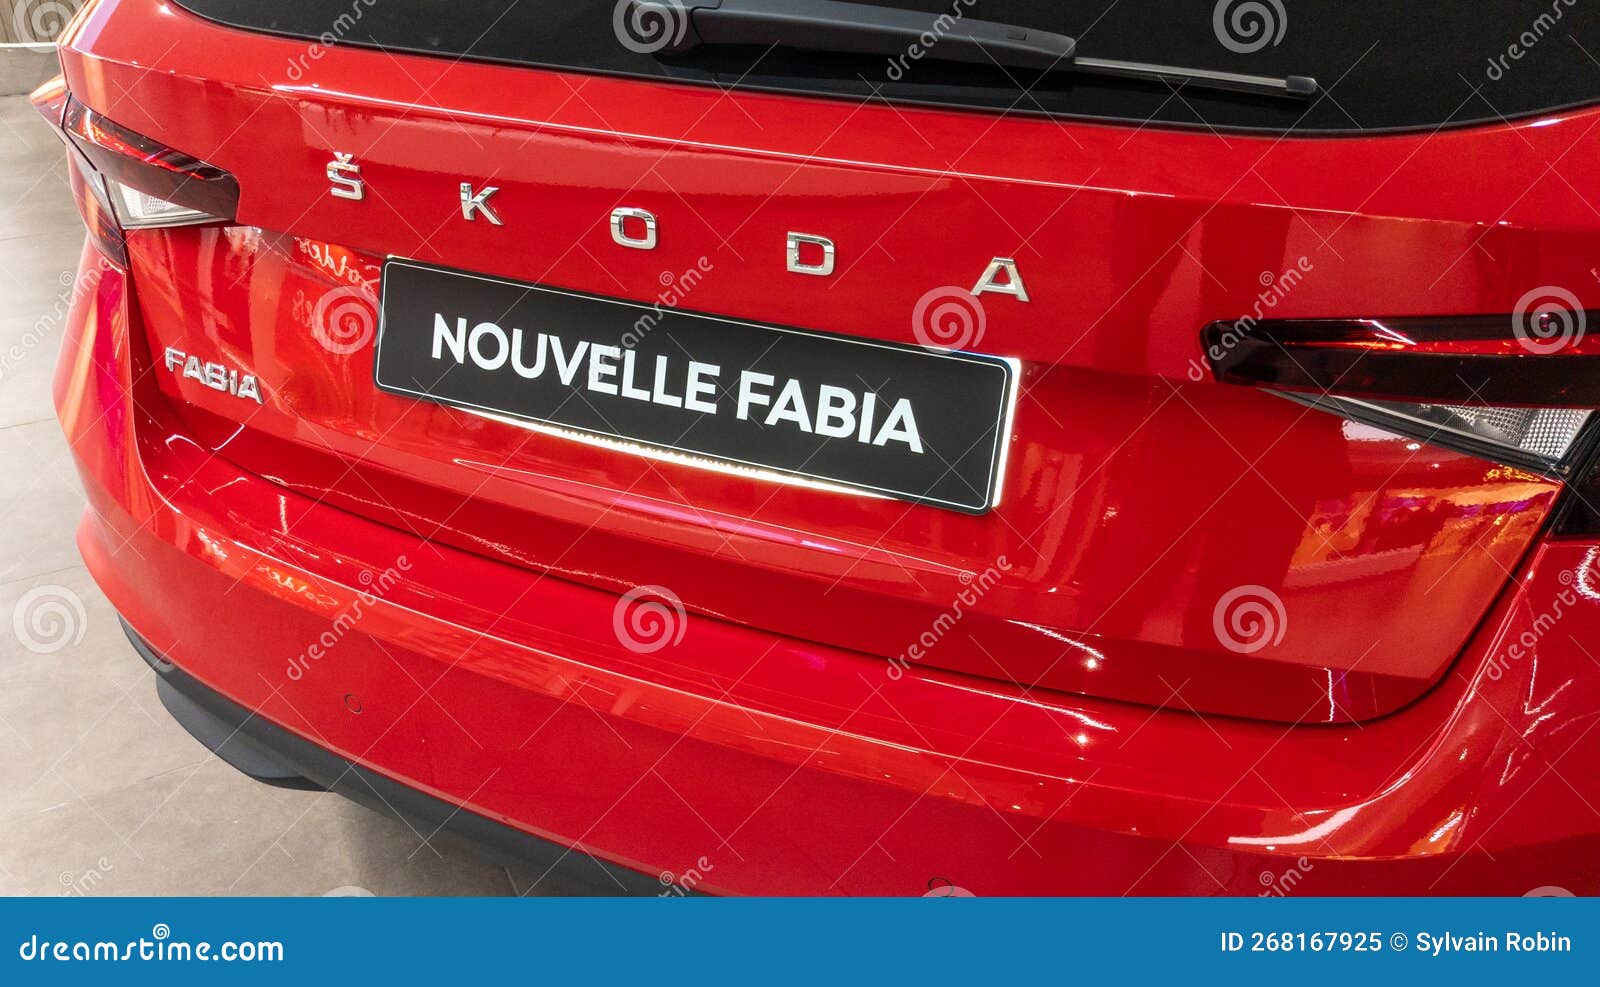 Skoda Fabia New Model Logo Brand and Text Sign Rear Car from Vw Volkswagen  Group Editorial Image - Image of rear, group: 268167925